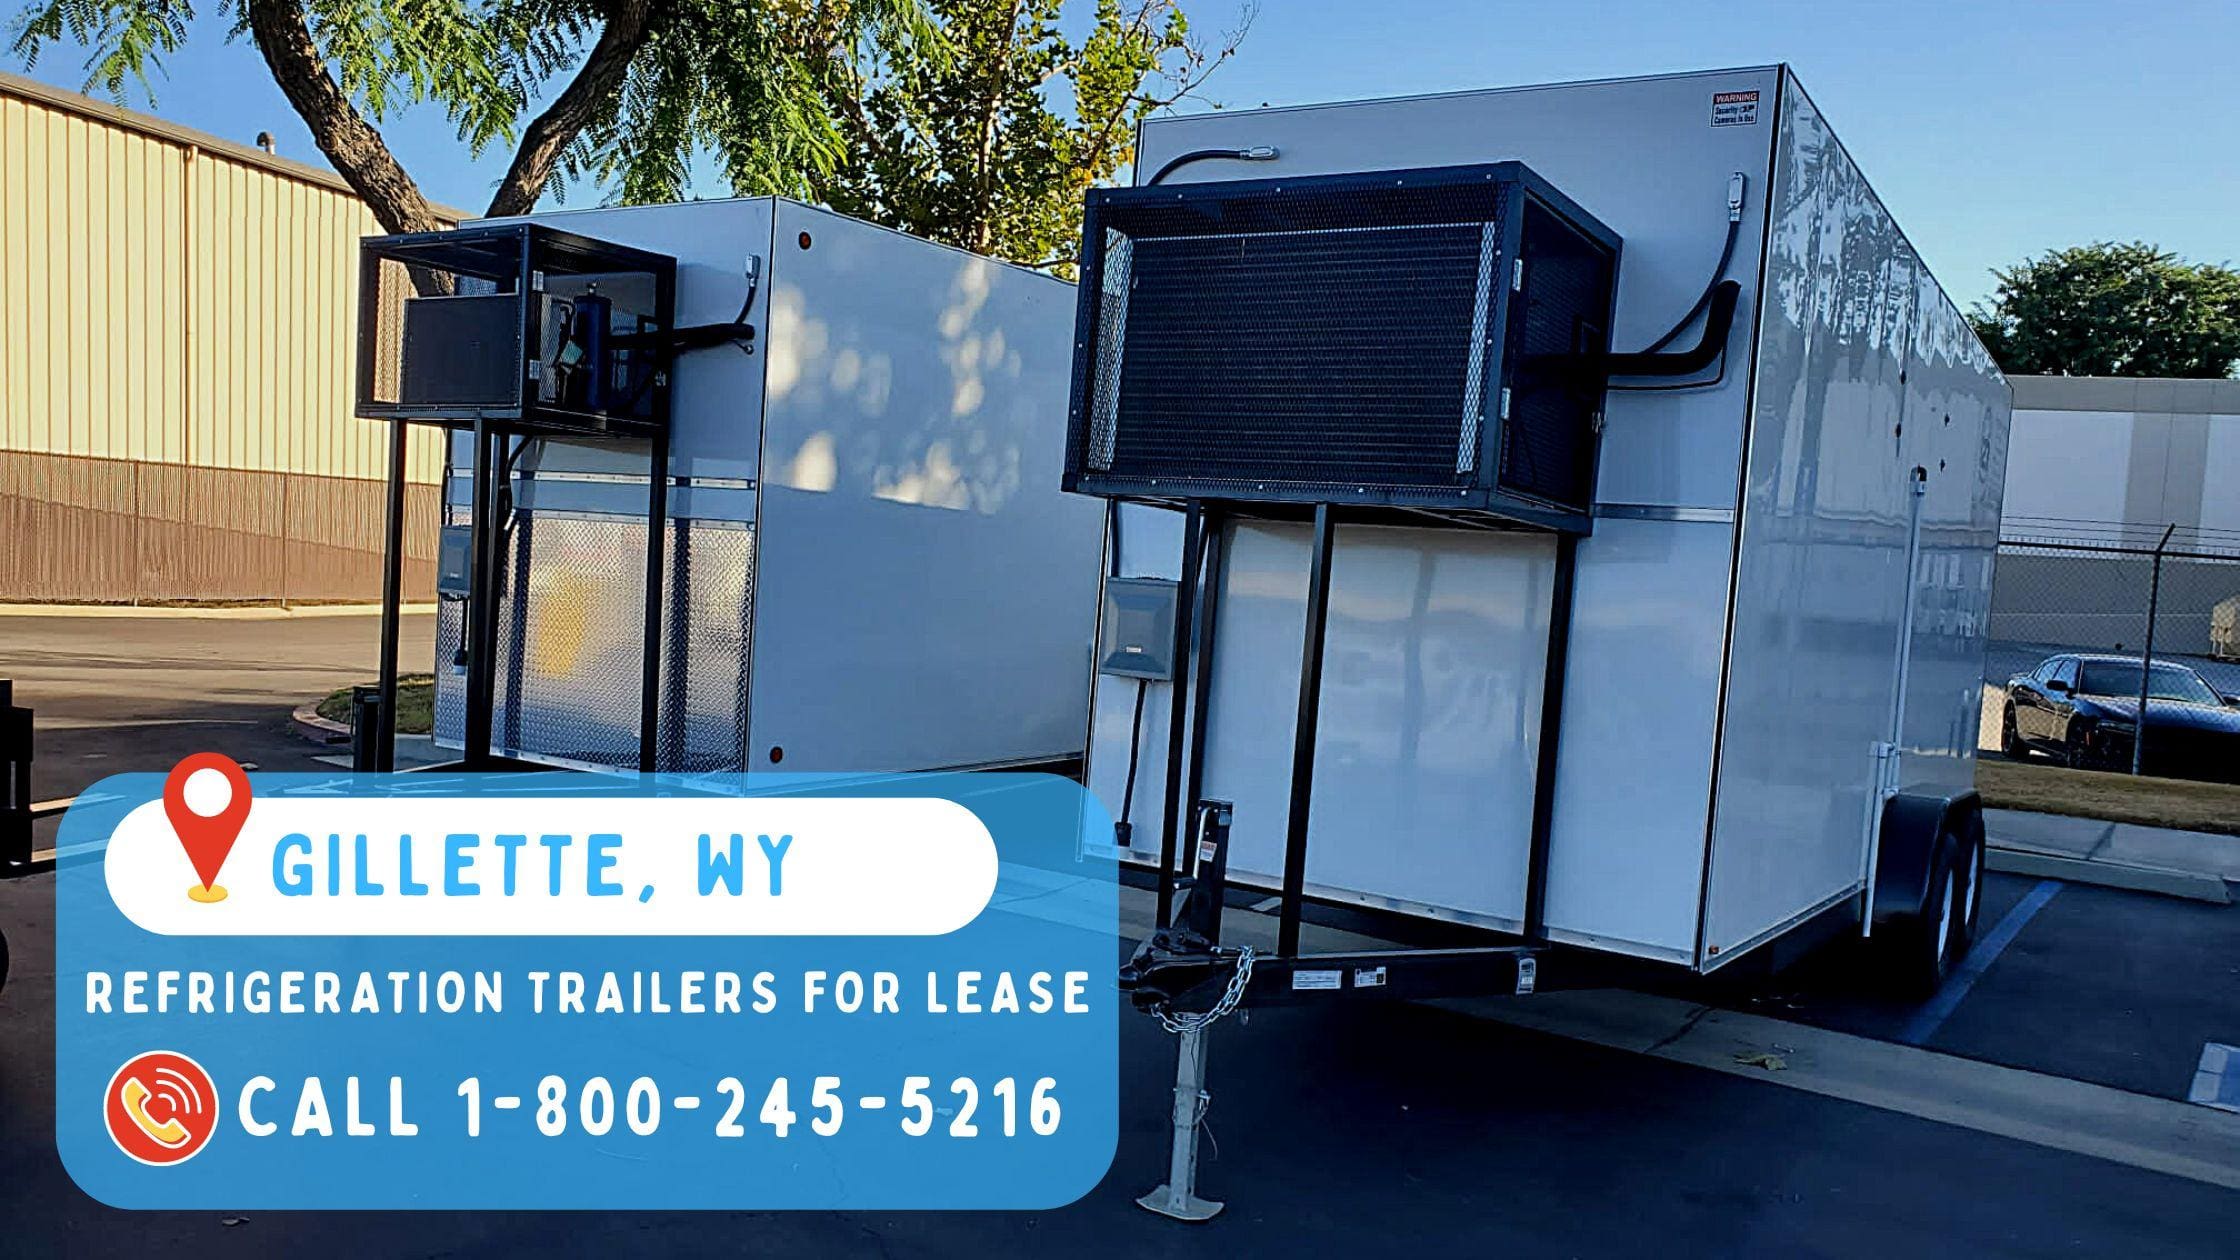 Refrigeration Trailers for Lease in Gillette, WY